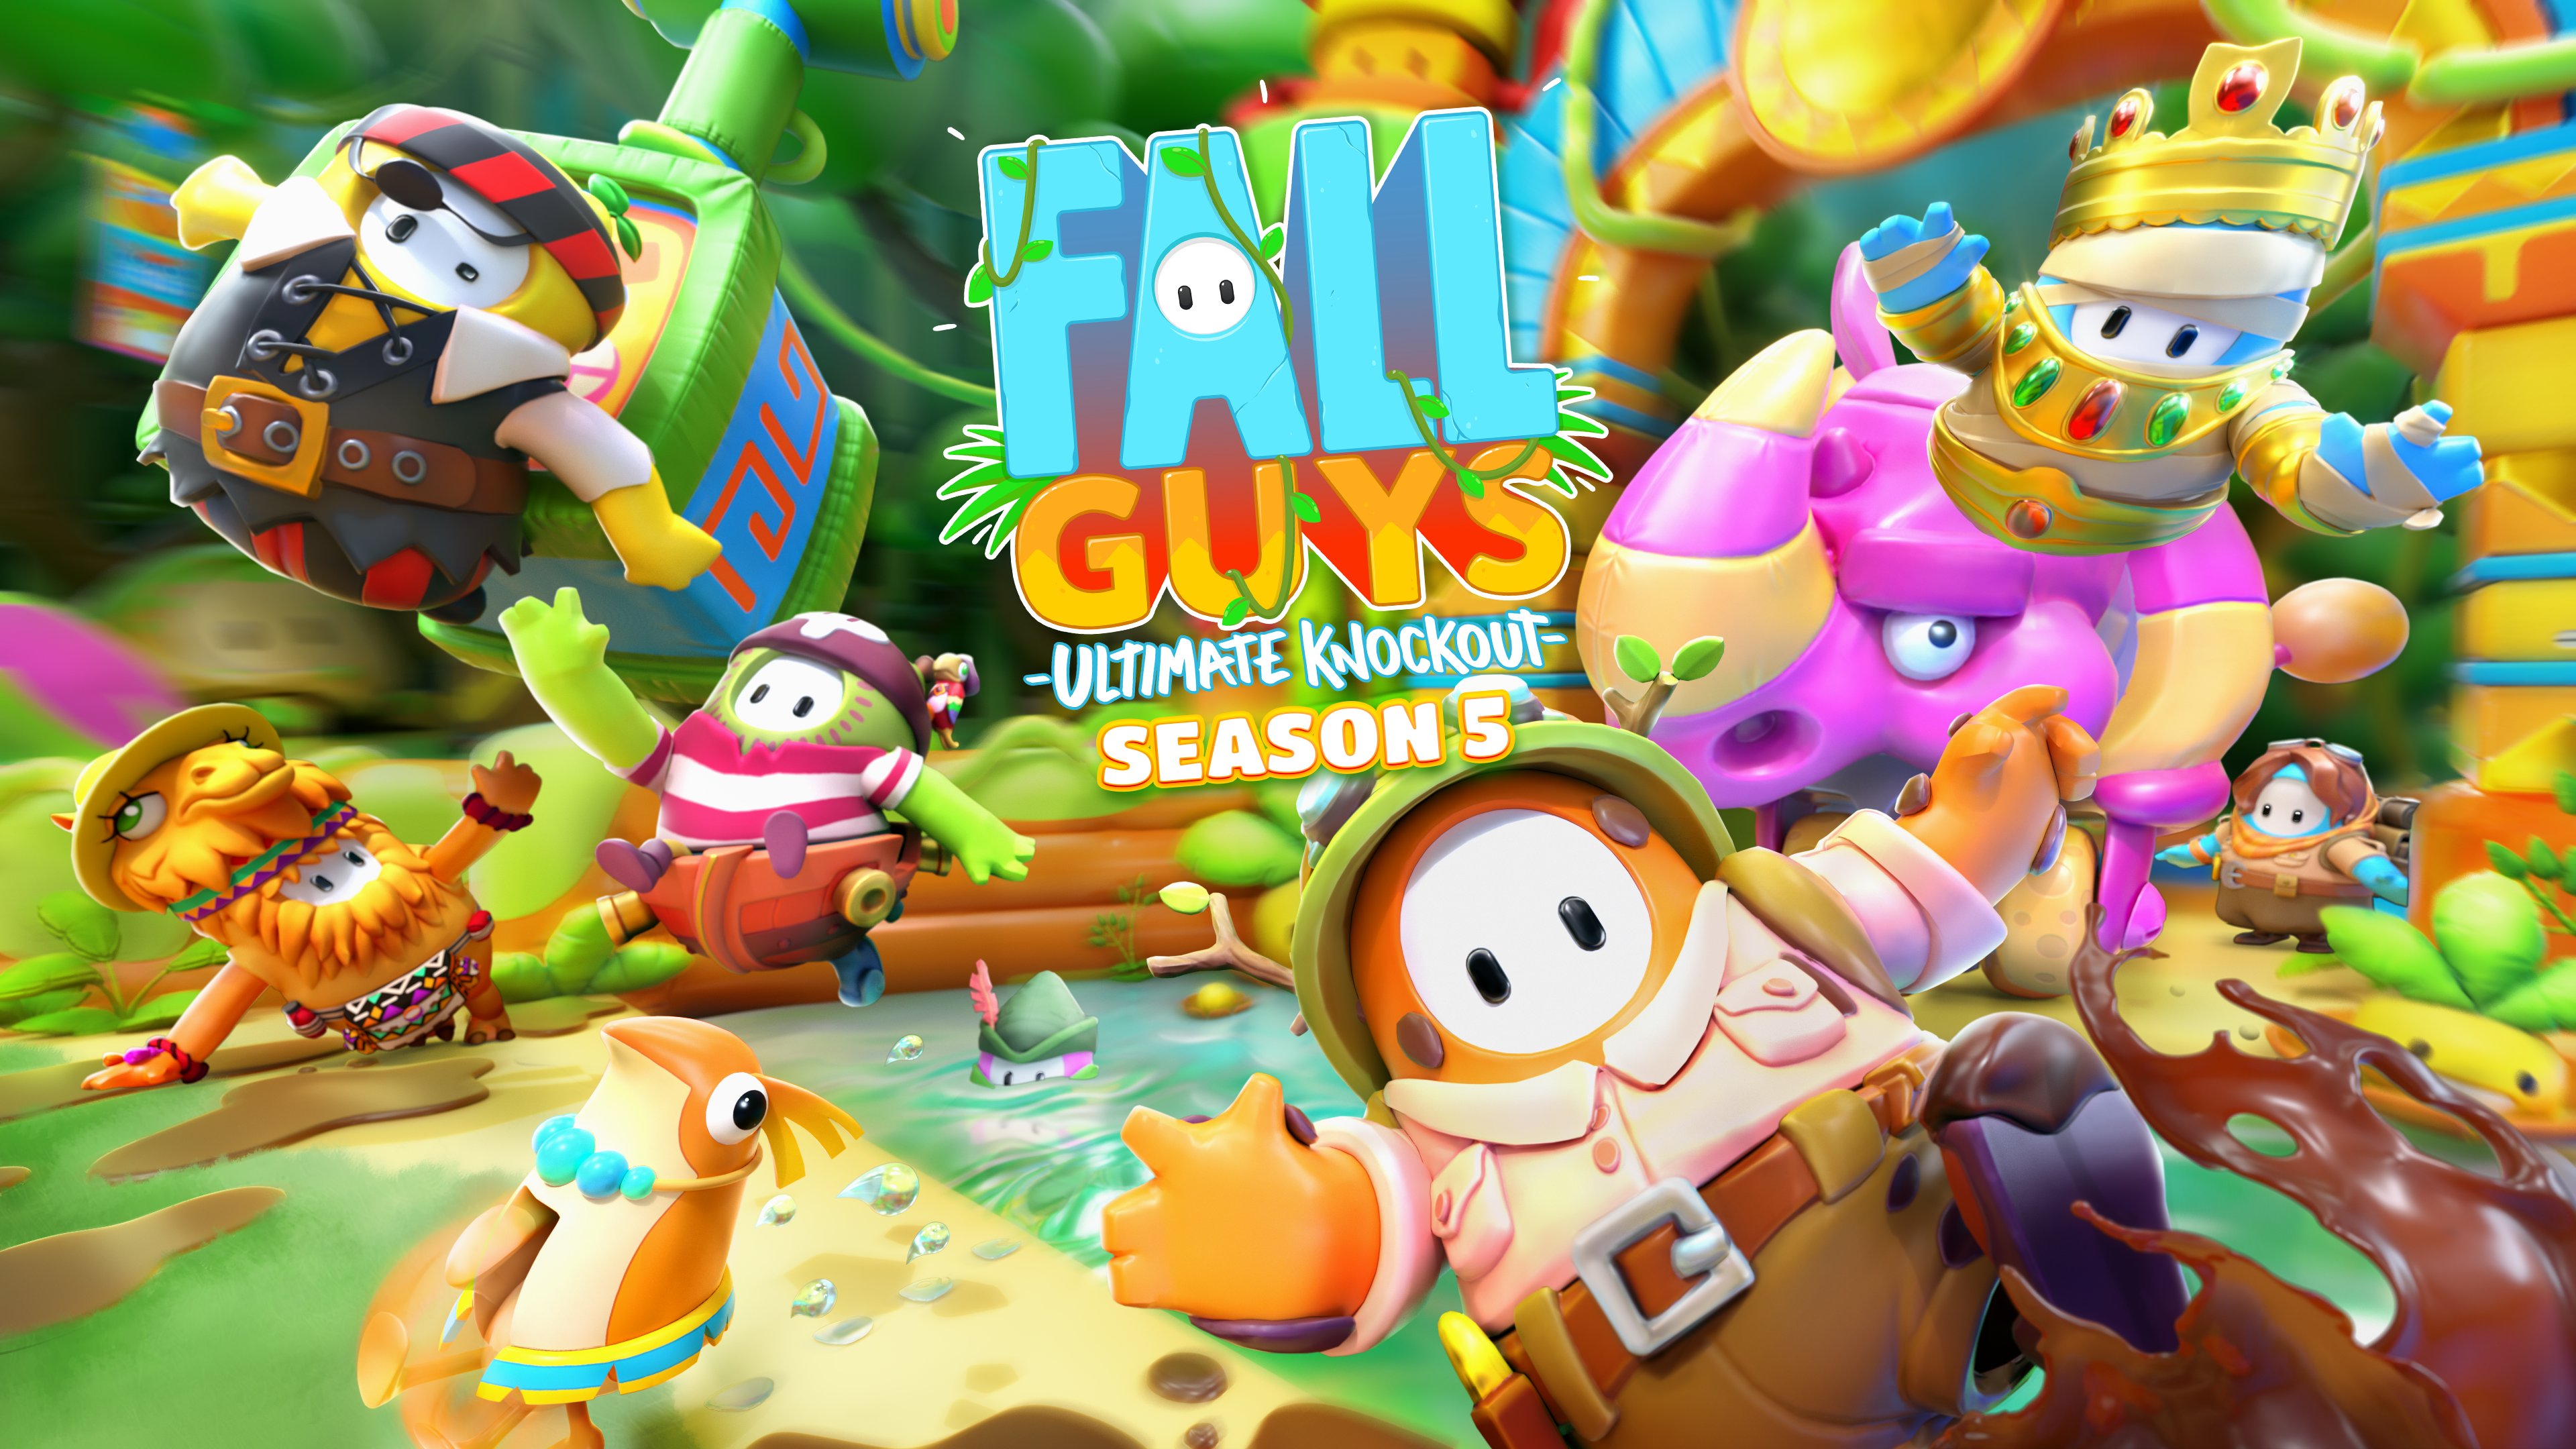 FALL GUYS: ULTIMATE KNOCKOUT free online game on